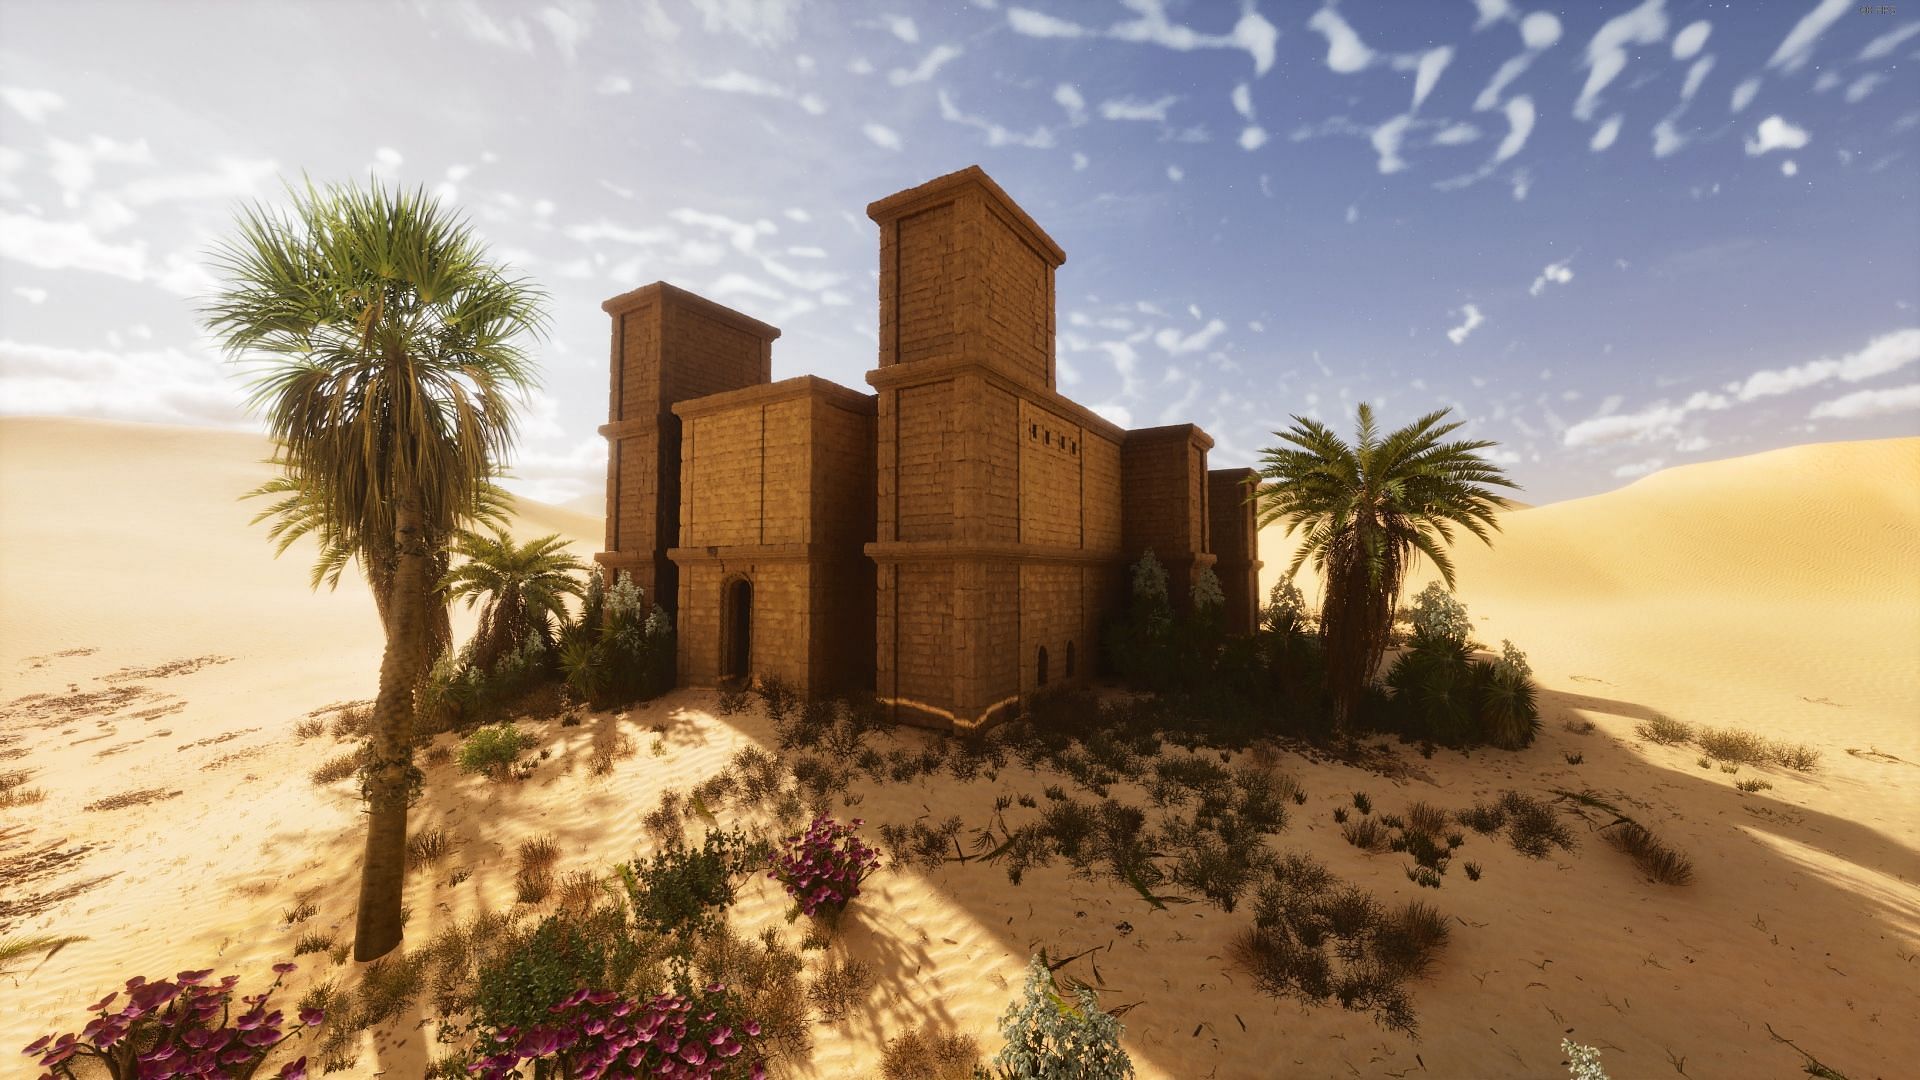 The entrance to the Ruins of Nosti (Image via Studio Wildcard)